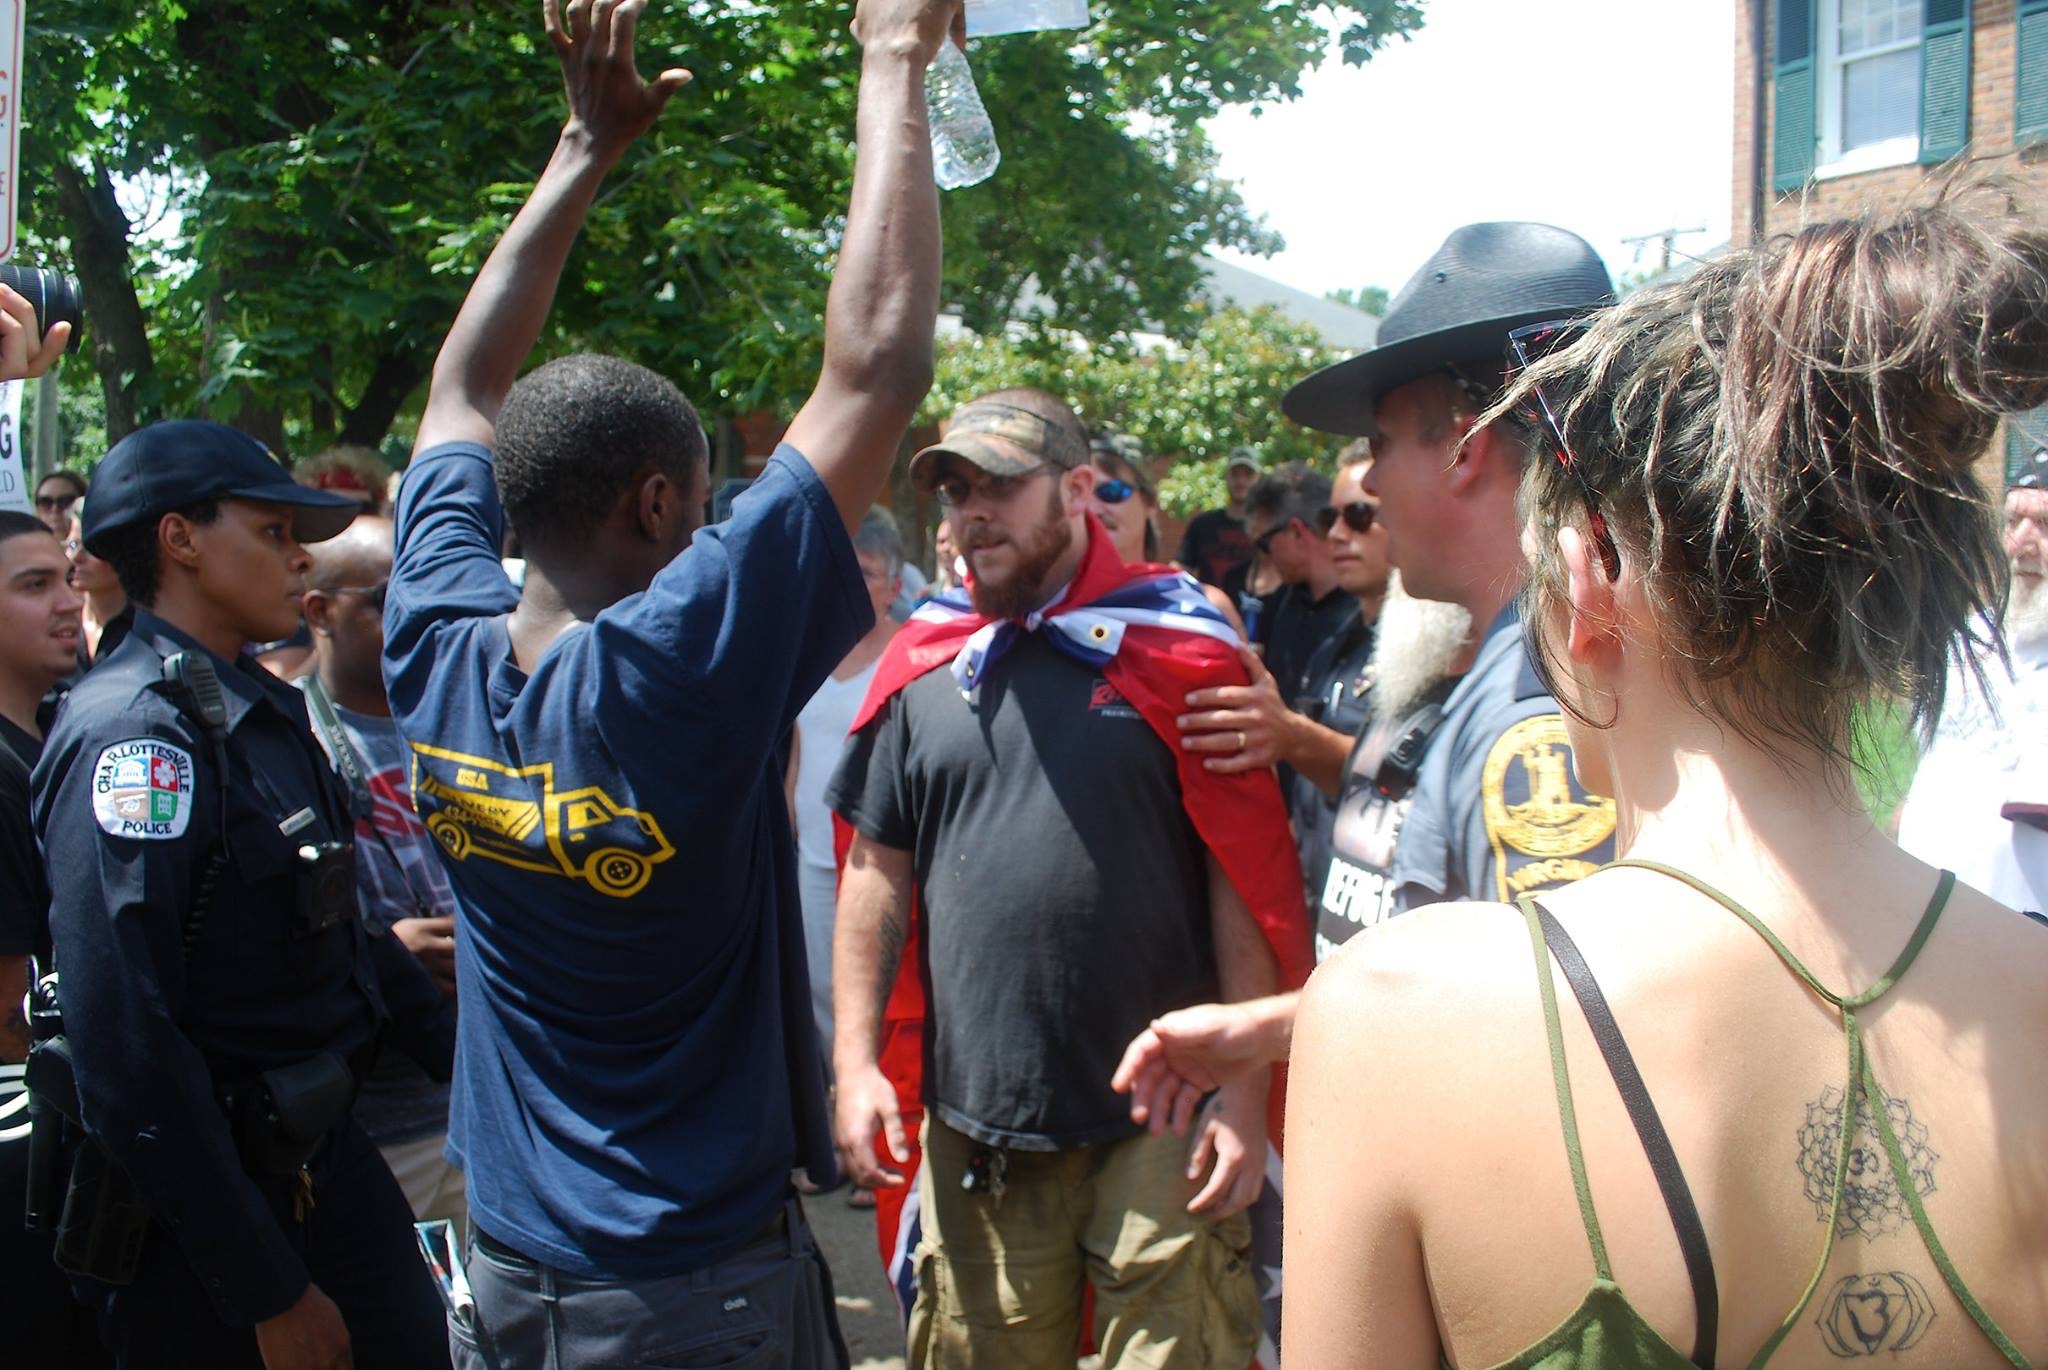 A man in a blue T-shirt and raised arm faces another man who has a confederate flag draped around his shoulders. On the side, an officer in a baseball cap is looking at the two men, and another officer is on the other side. A woman’s back is in the frame as well.